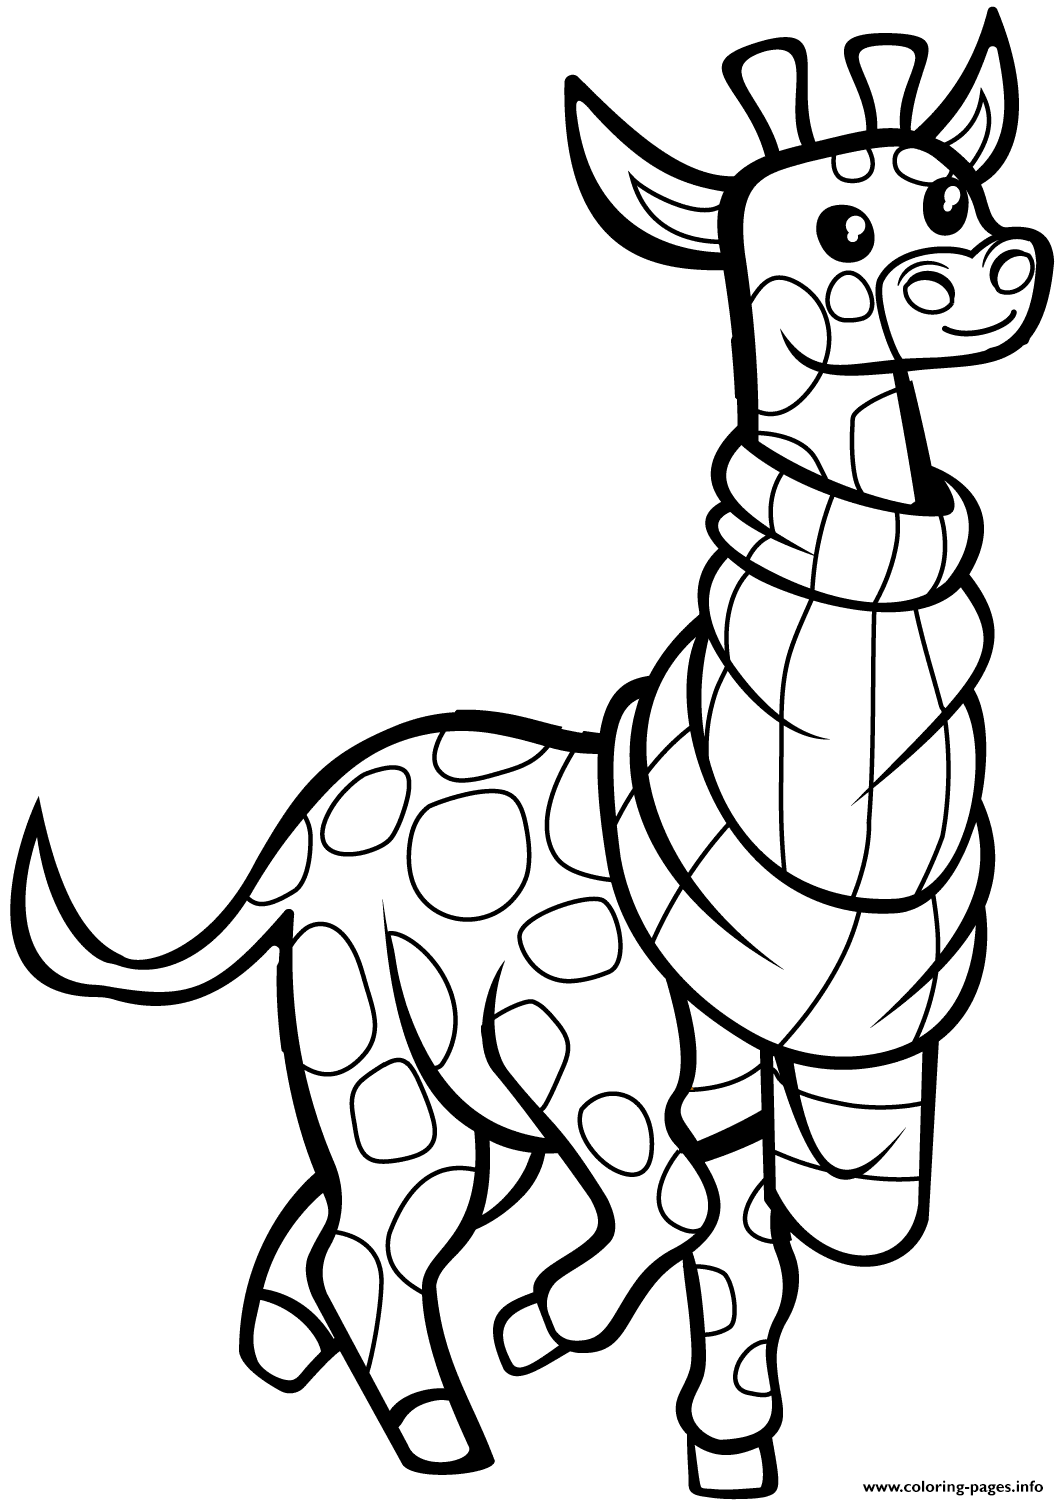 Funny Giraffe With Scarf Coloring Pages Printable